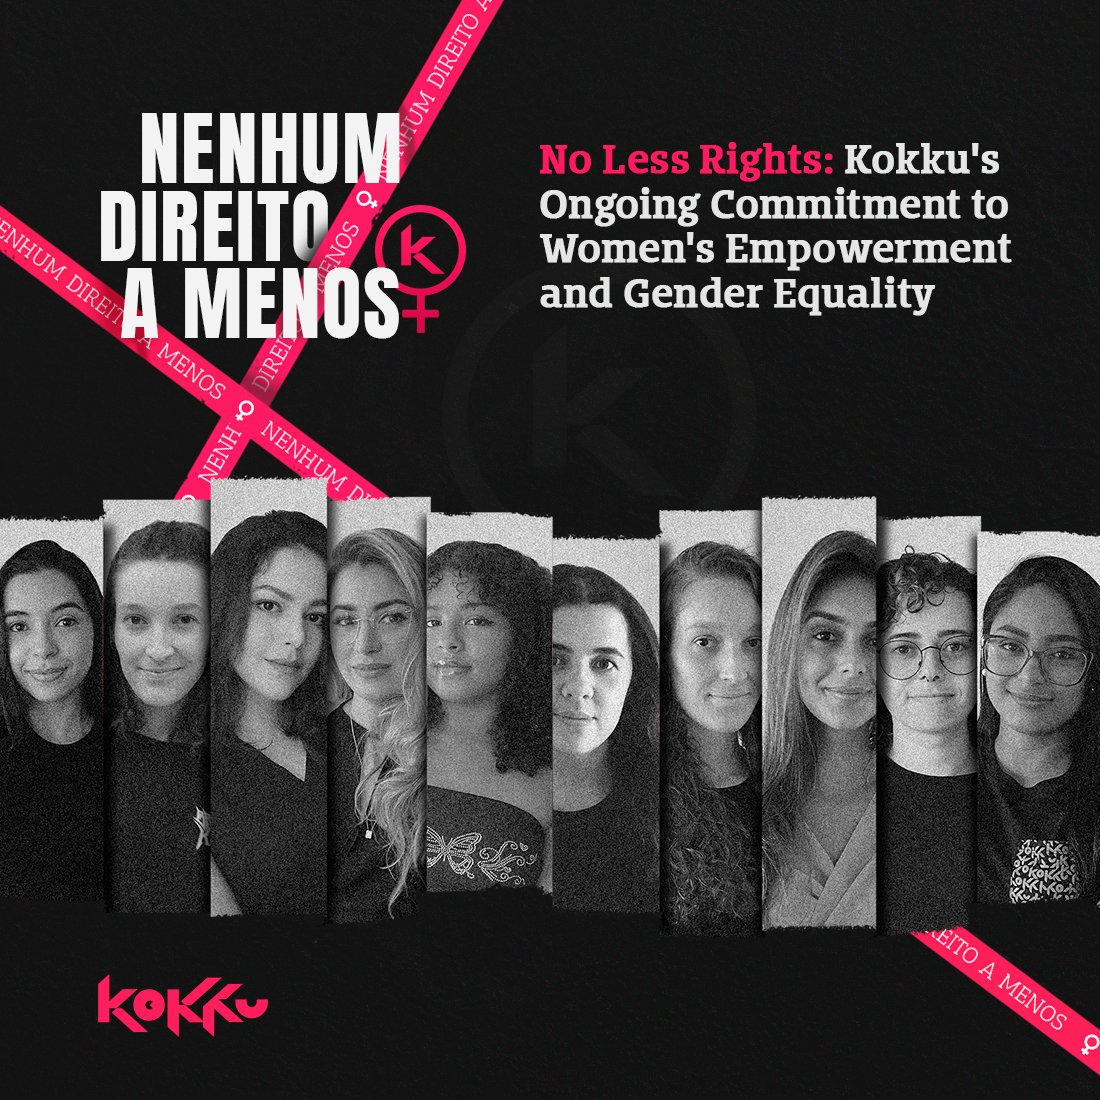 Discover how Kokku 'No Less Right' program is committed to gender equality and women's empowerment. We are on this journey, and our actions continue beyond March. 🔗Learn more: kokku.com.br/no-less-rights…